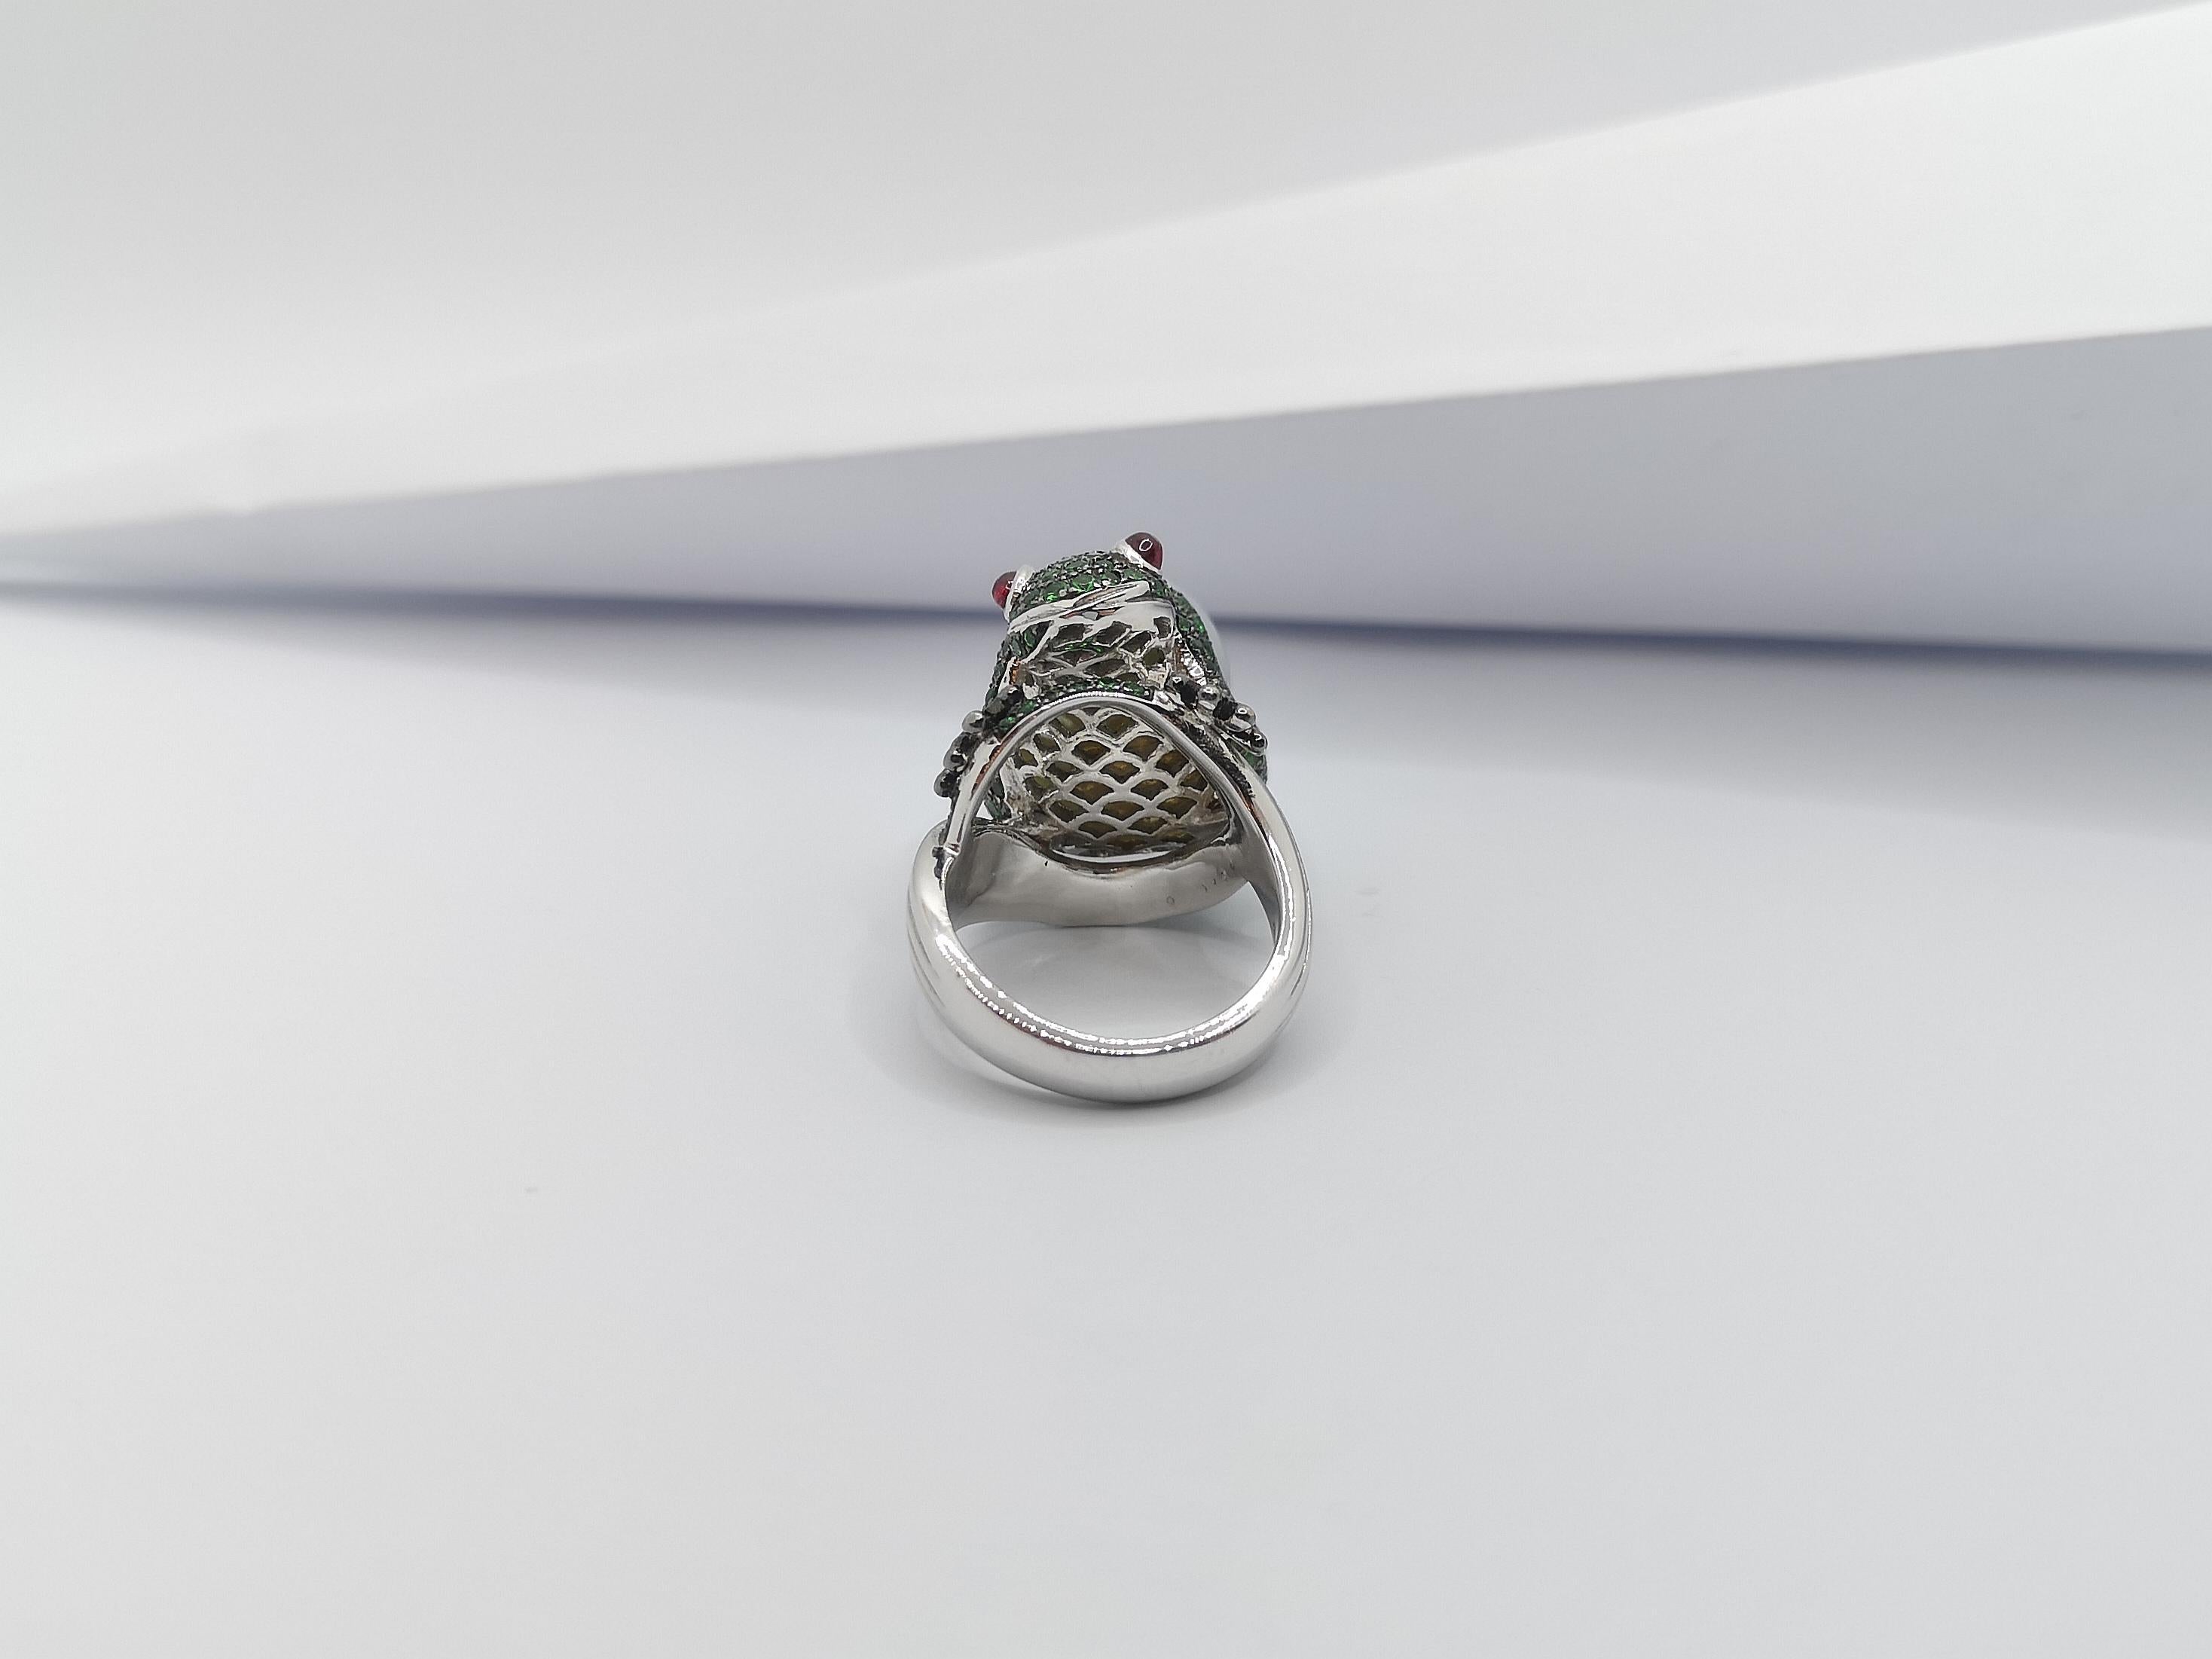 South Sea Pearl with Tsavorite and Cabochon Ruby Frog Ring Set in 18K White Gold For Sale 3